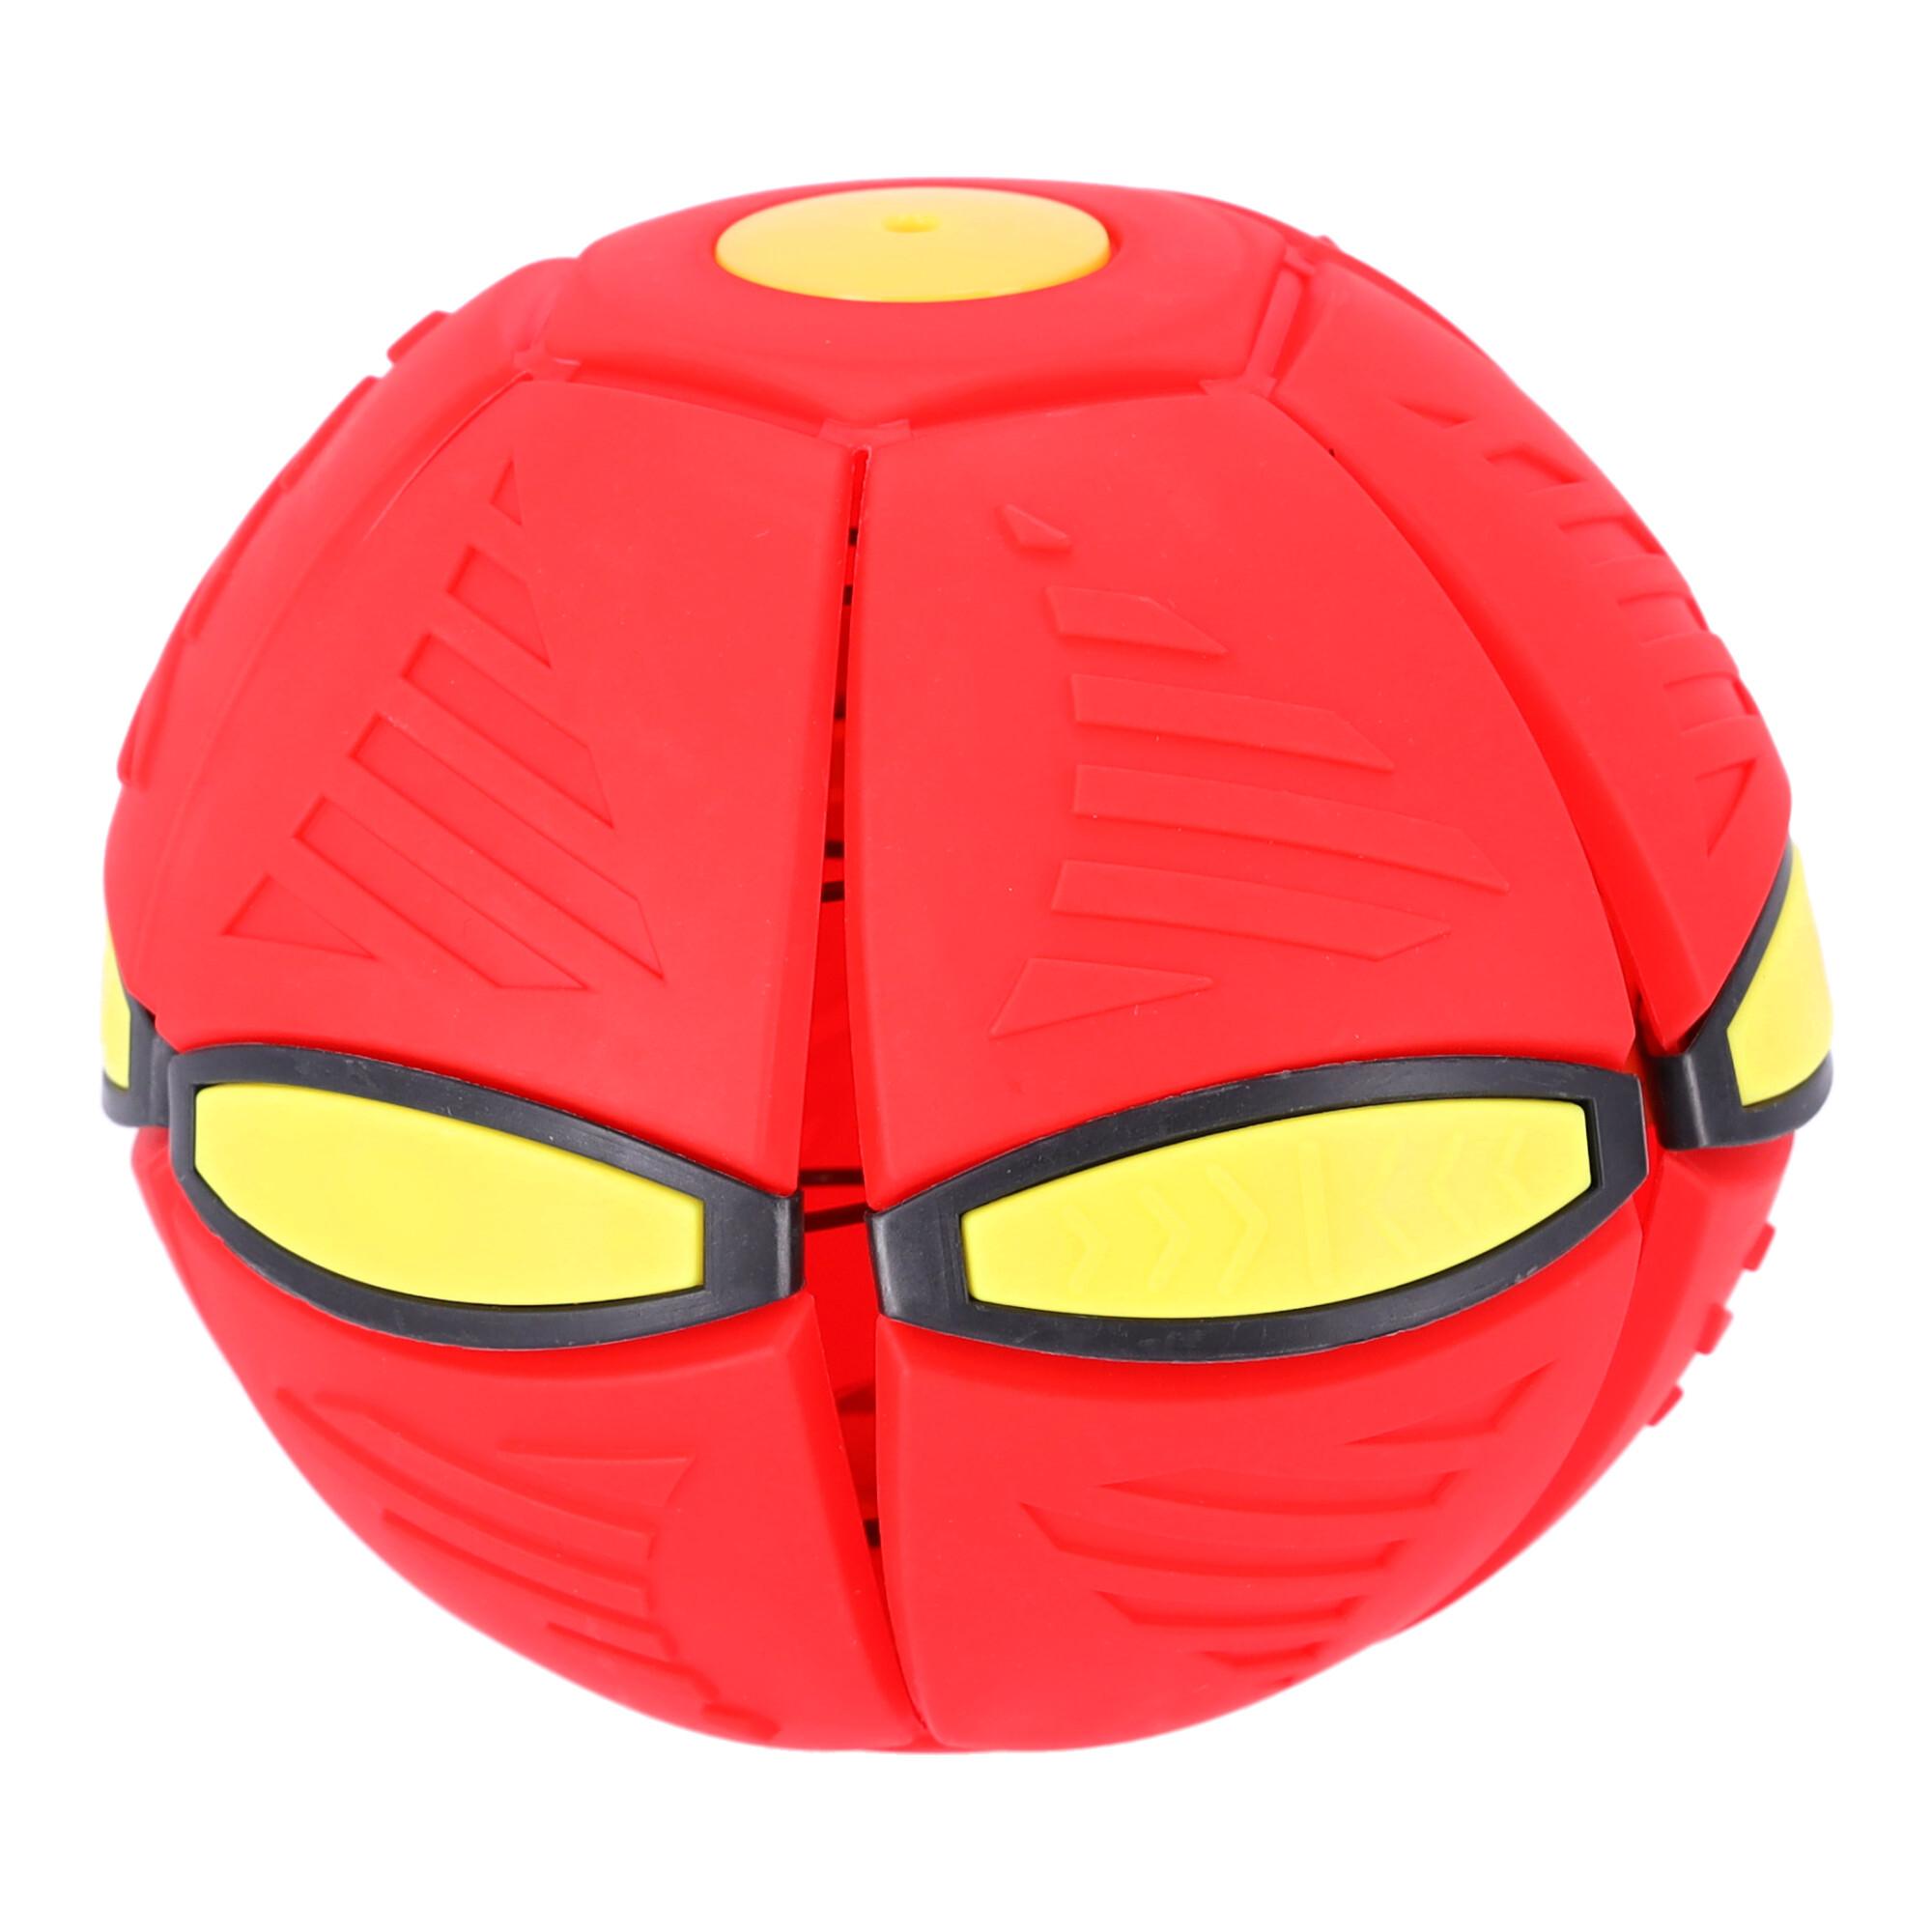 Flying ball 2-in-1, disc-ball - red